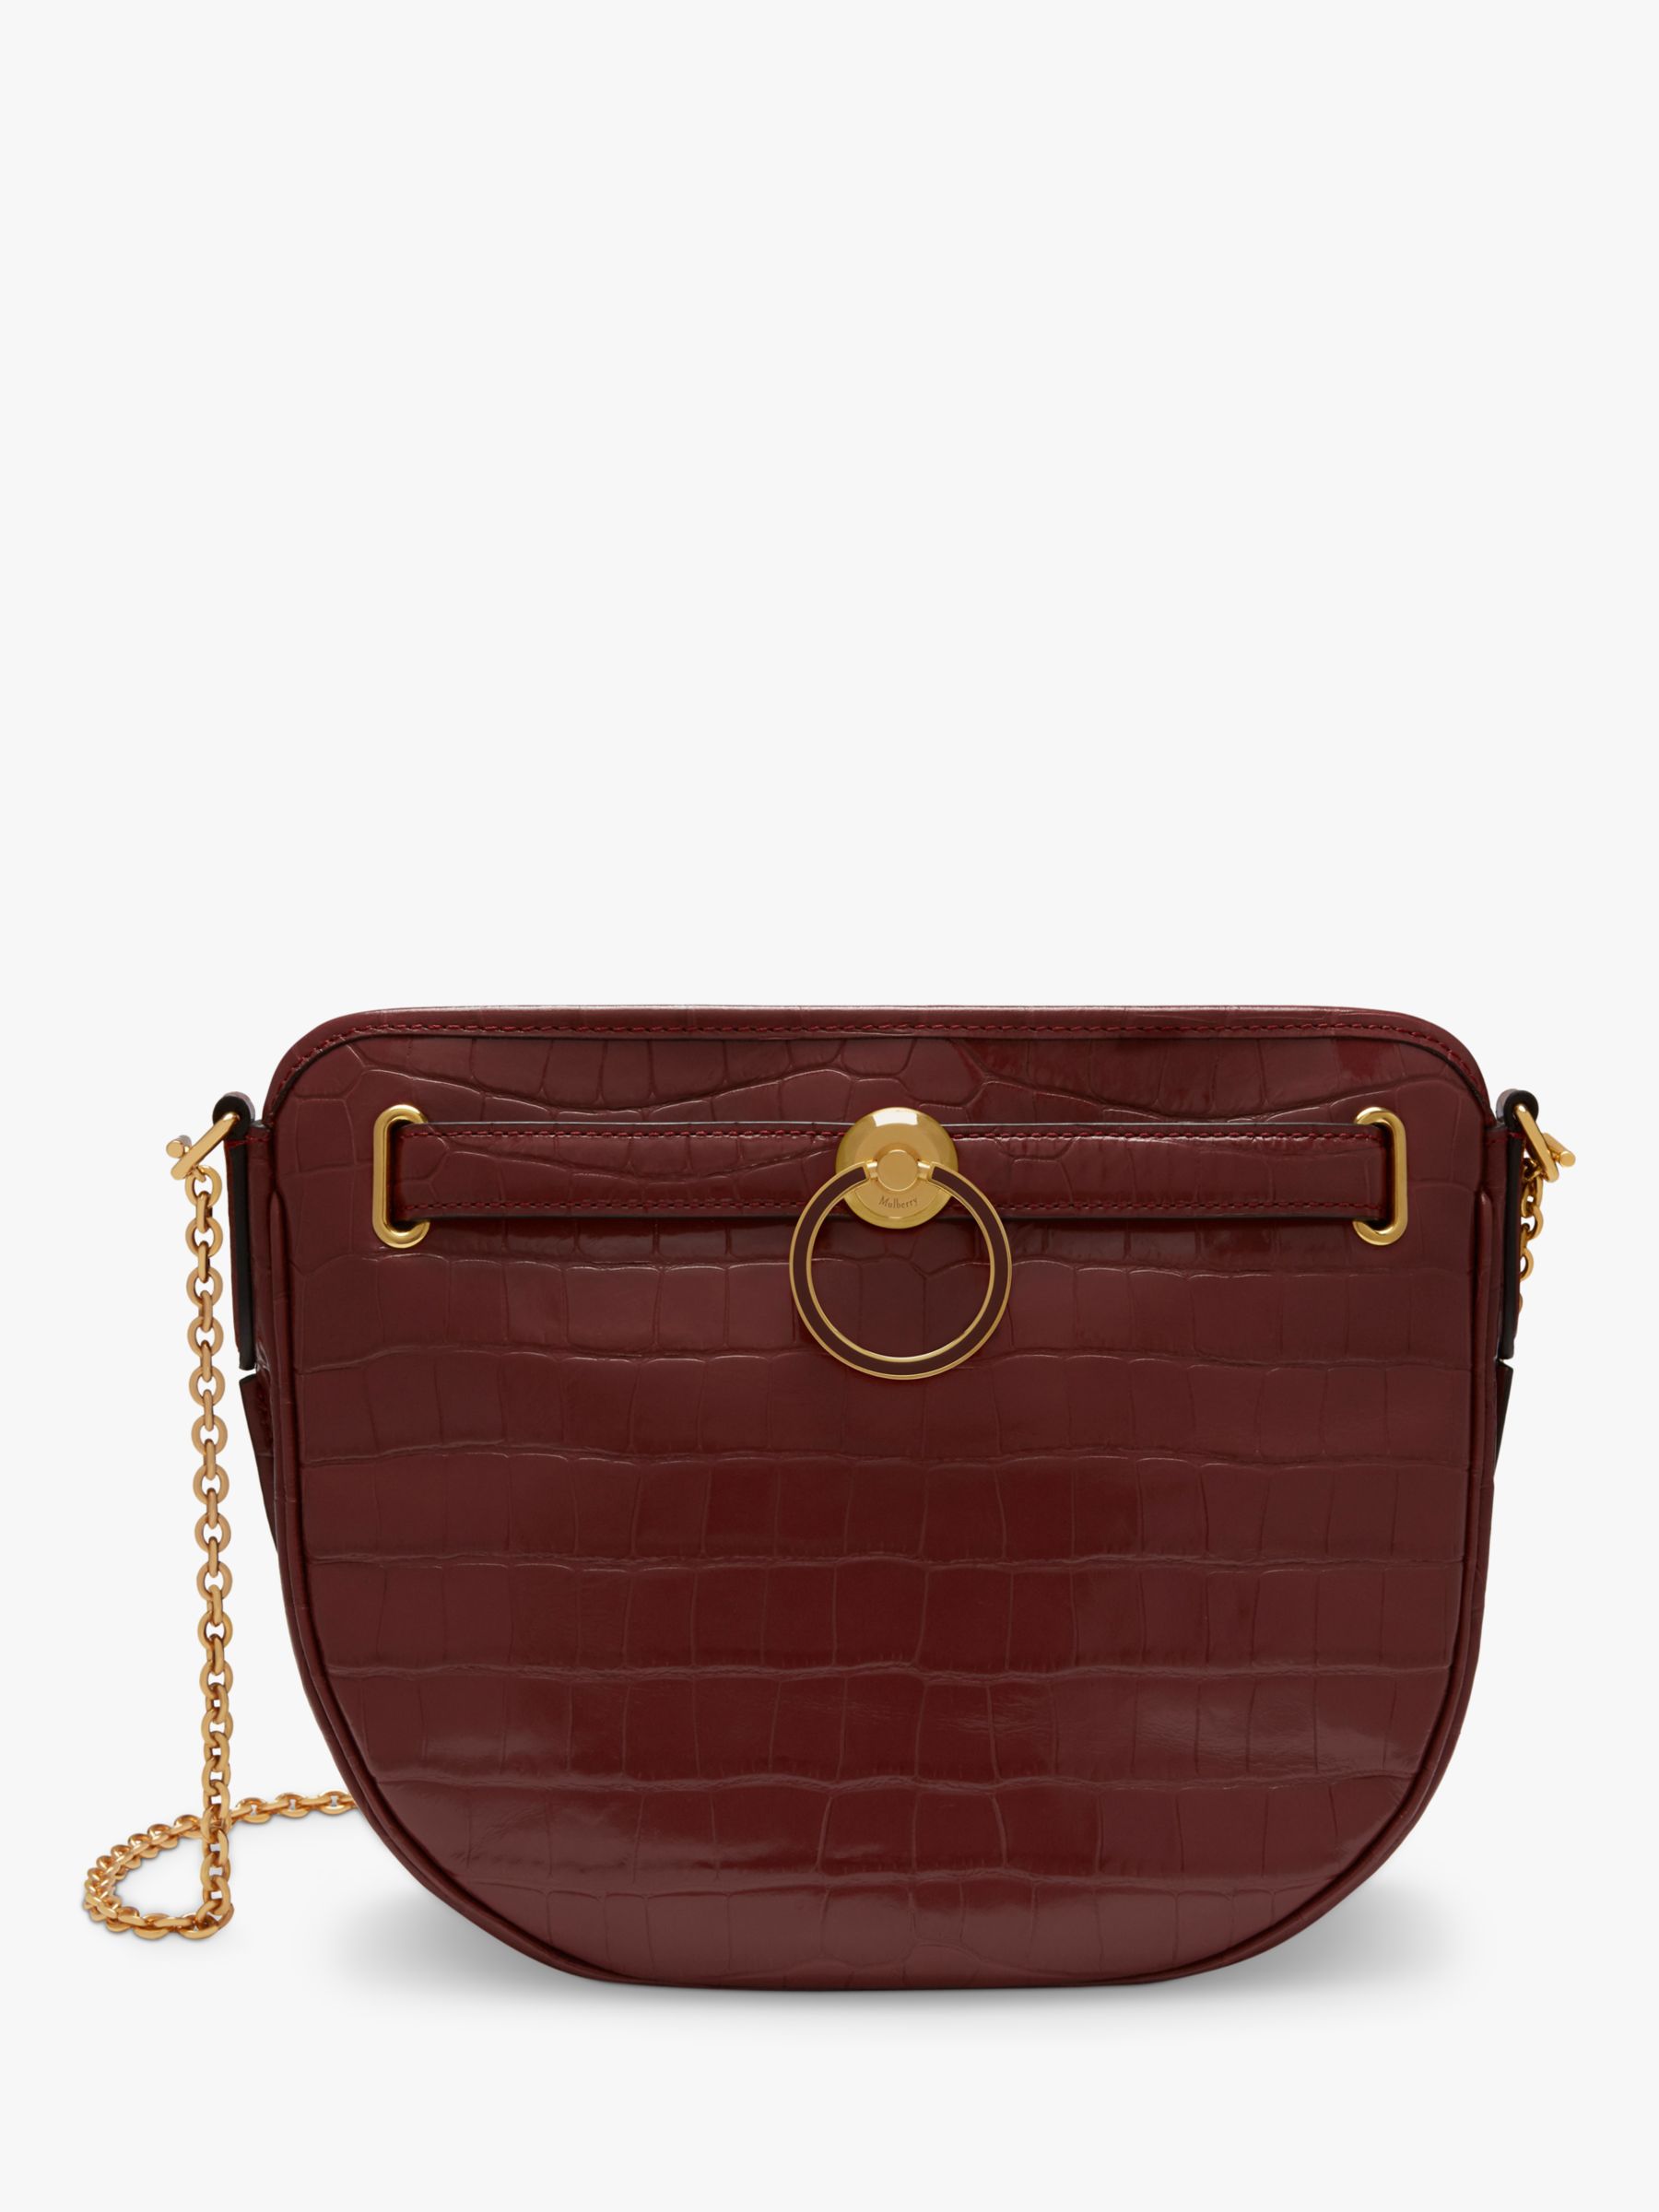 Mulberry Brockwell Croc Embossed Leather Satchel Bag at John Lewis & Partners